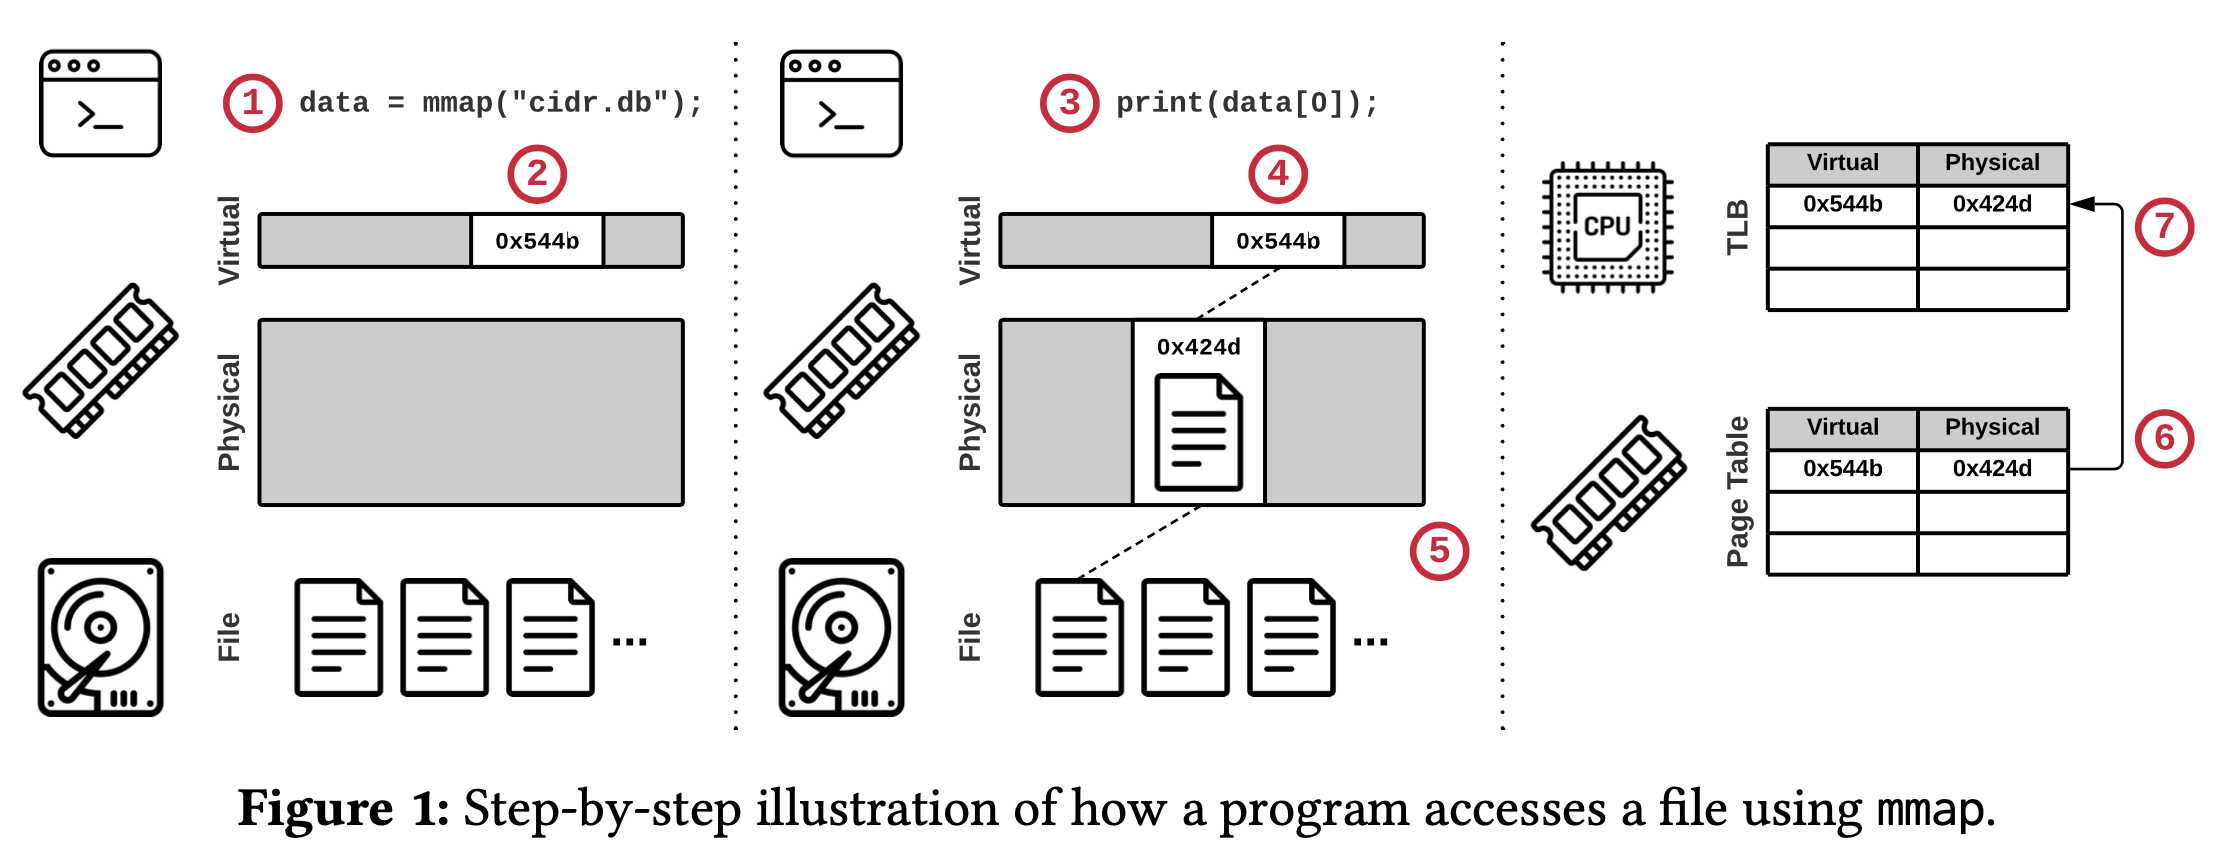 Figure 1: Step-by-step illustration of how a program accesses a file using mmap